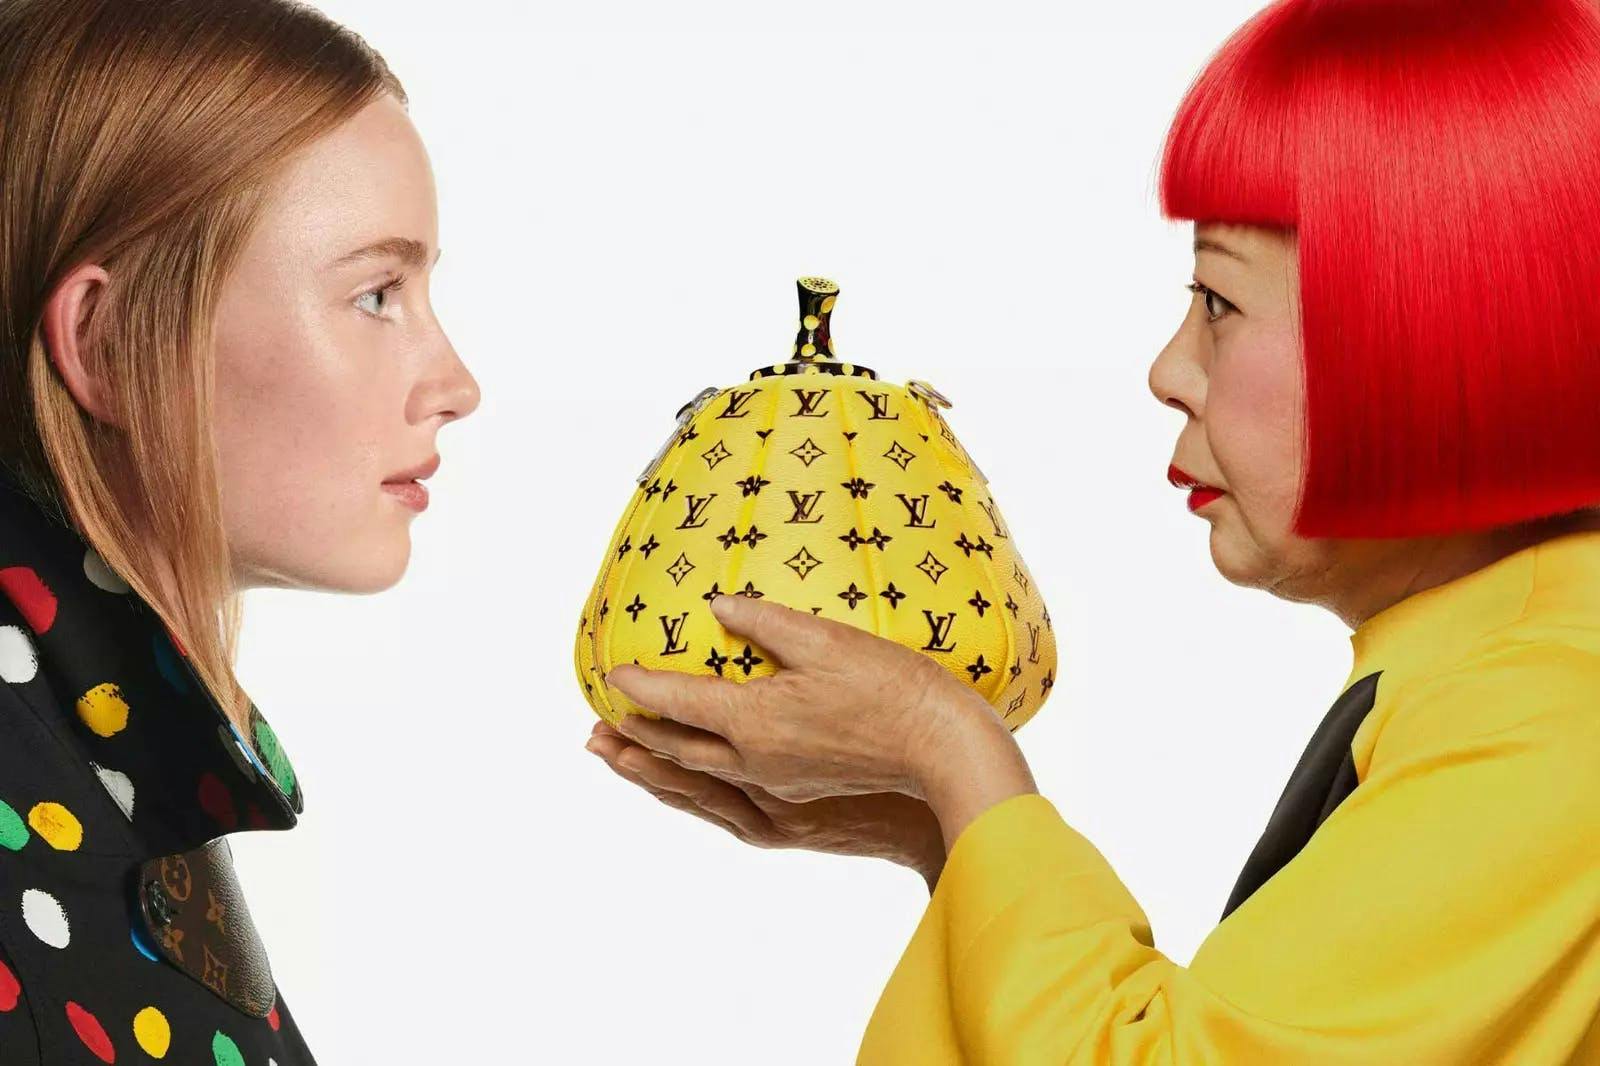 Two women looking at each other against a white backdrop while one woman hold a yellow pear shaped purse.